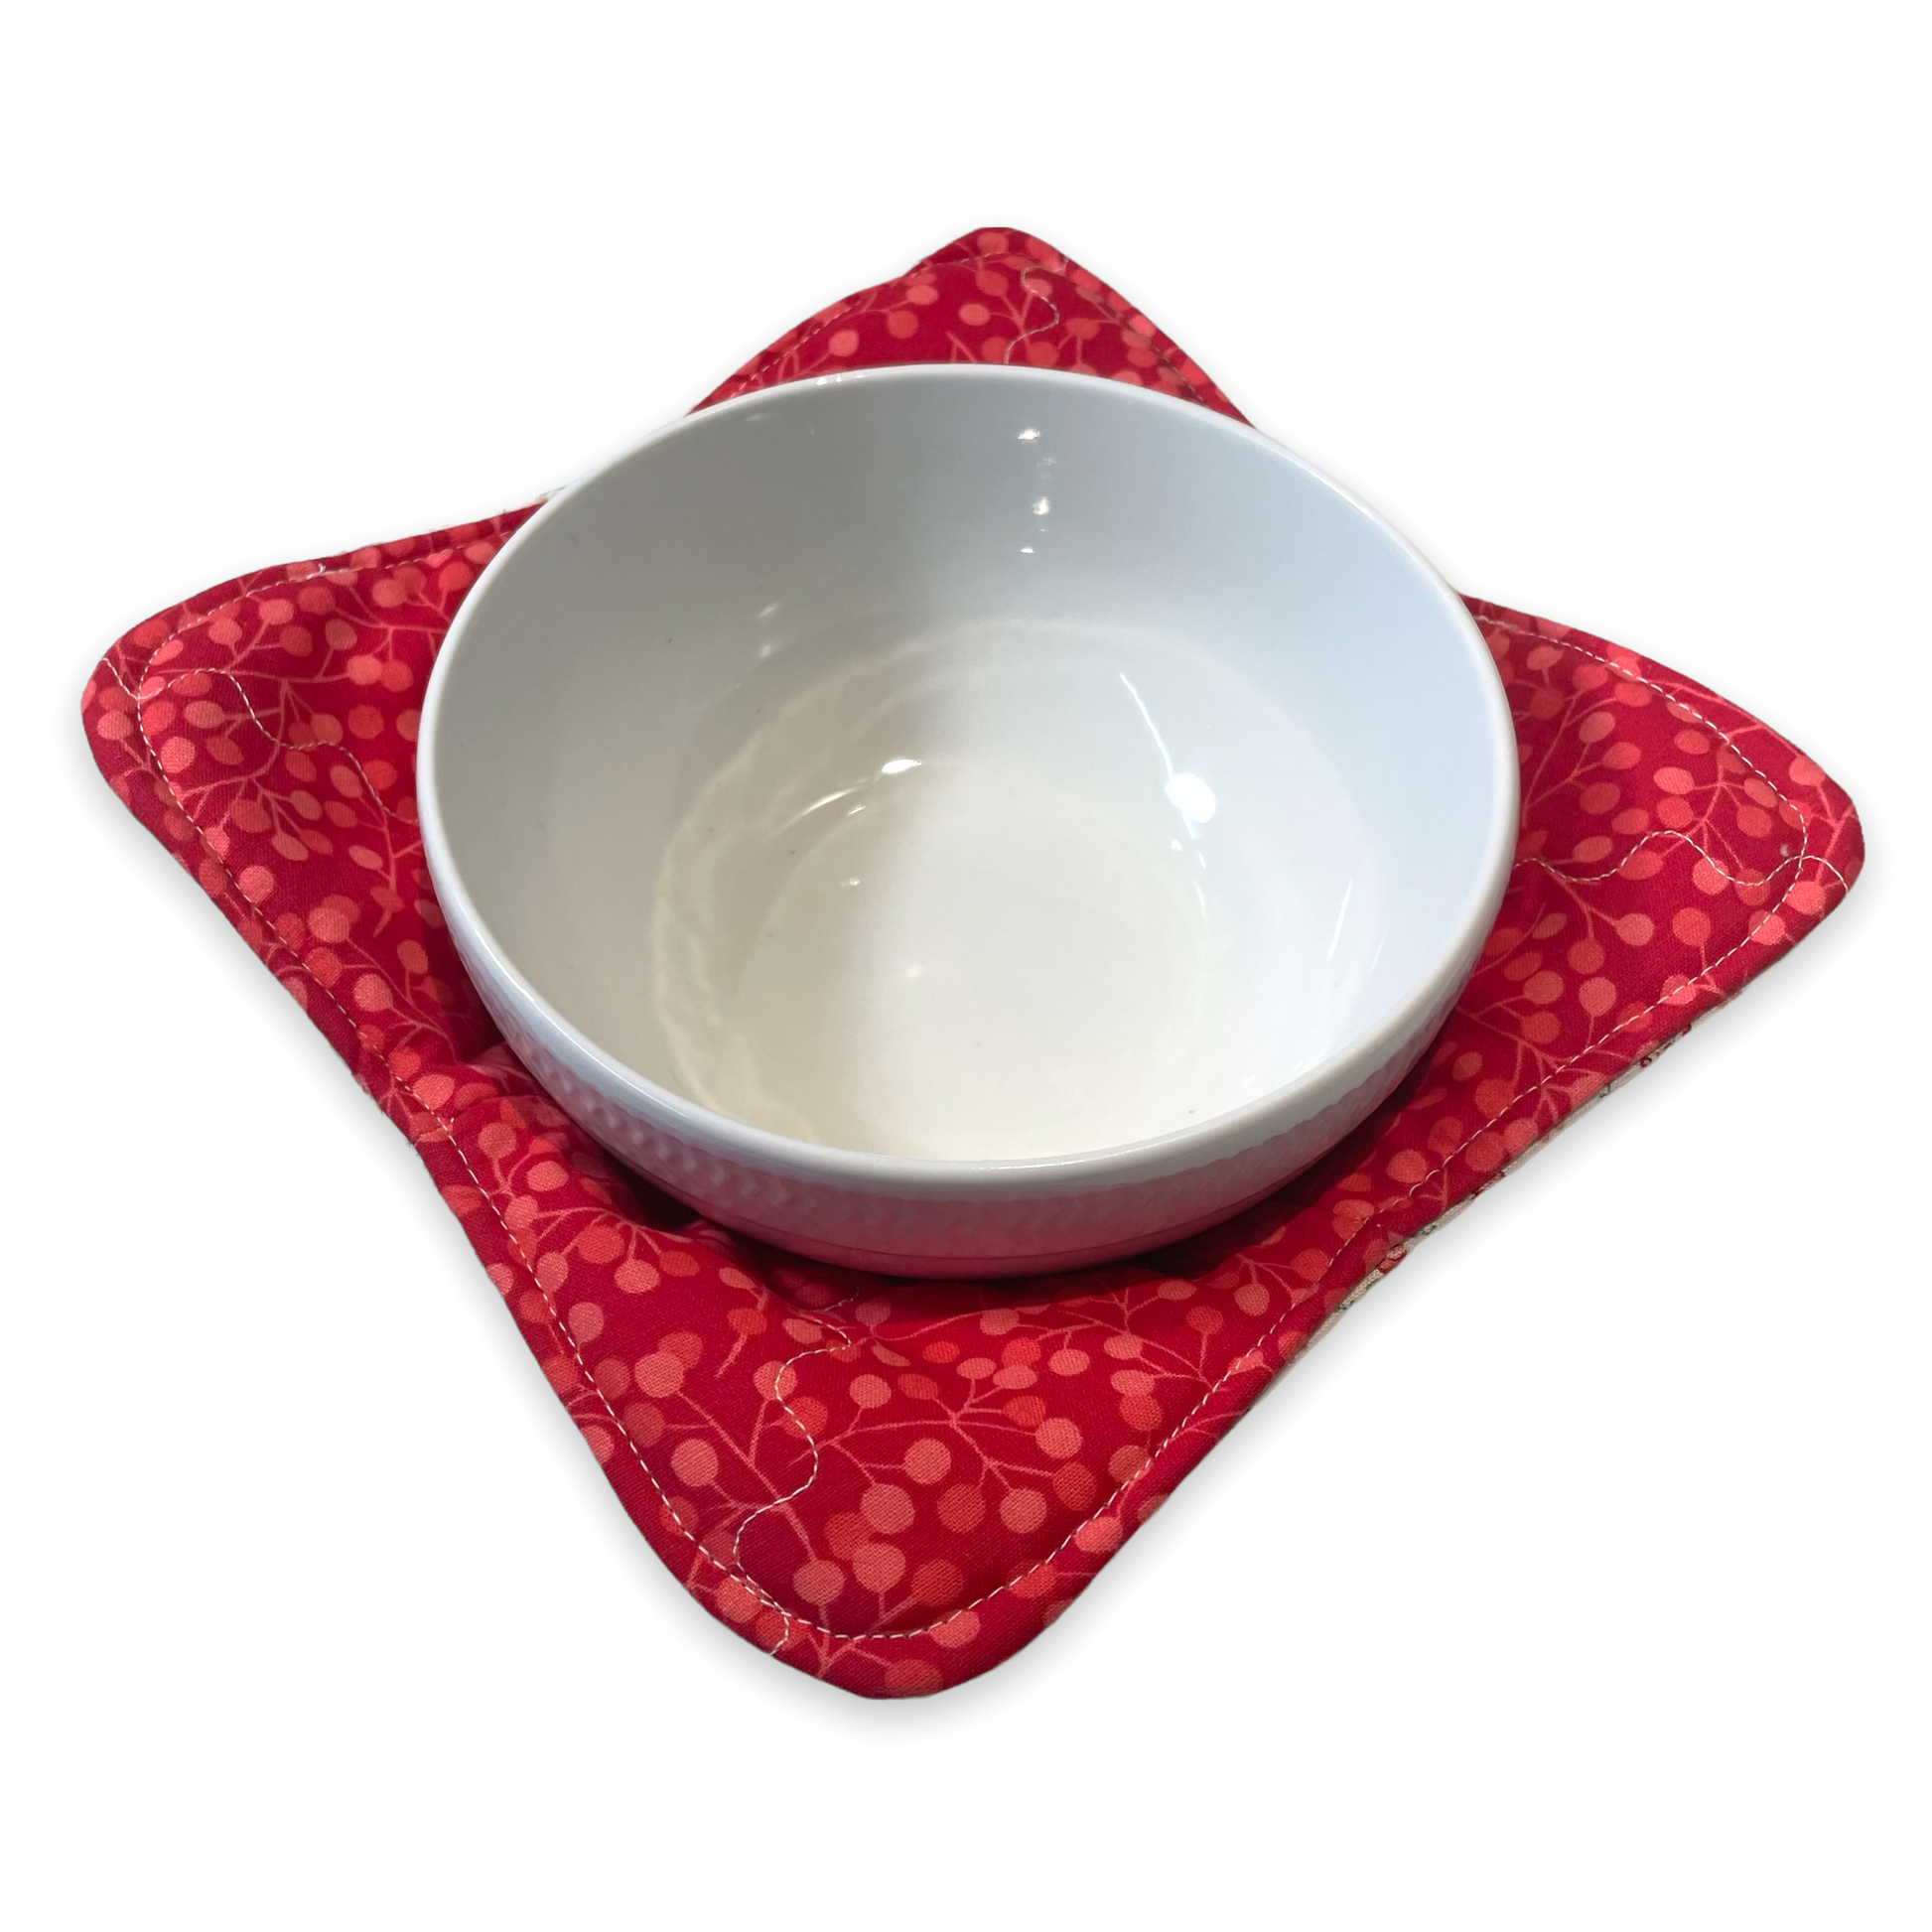 Washable and reversible, these super handy cotton soup bowl huggers are a fantastic addition to your kitchen. Handmade in Canada with quilt cotton, cotton thread and Pellon Wrap and Zap Batting. Soup bowl cozies make great house warming gifts and stocking stuffers. Shop your favorite color today and be sure to follow along on the Home Stitchery Decor YouTube Channel.